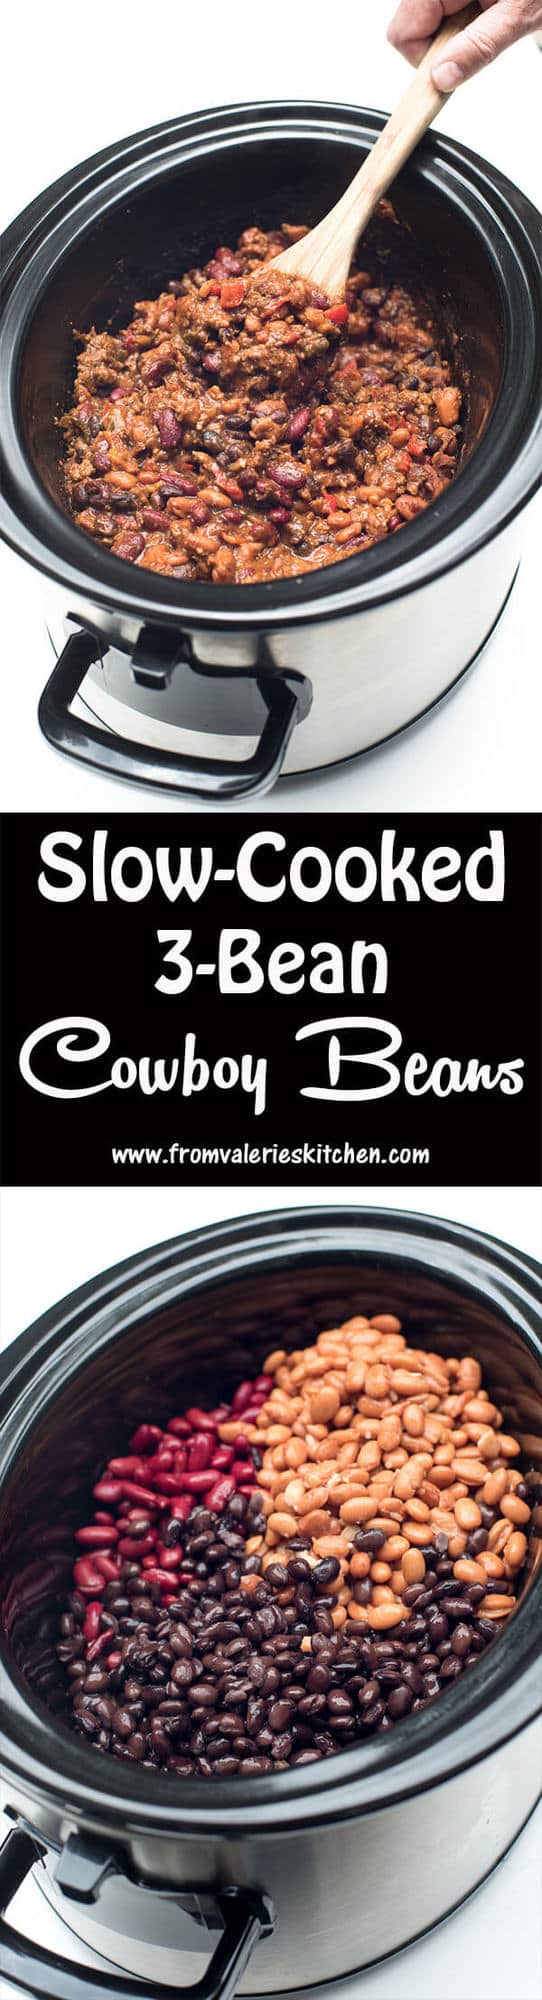 A two image vertical collage of Slow-Cooked 3-Bean Cowboy Beans with text overlay.